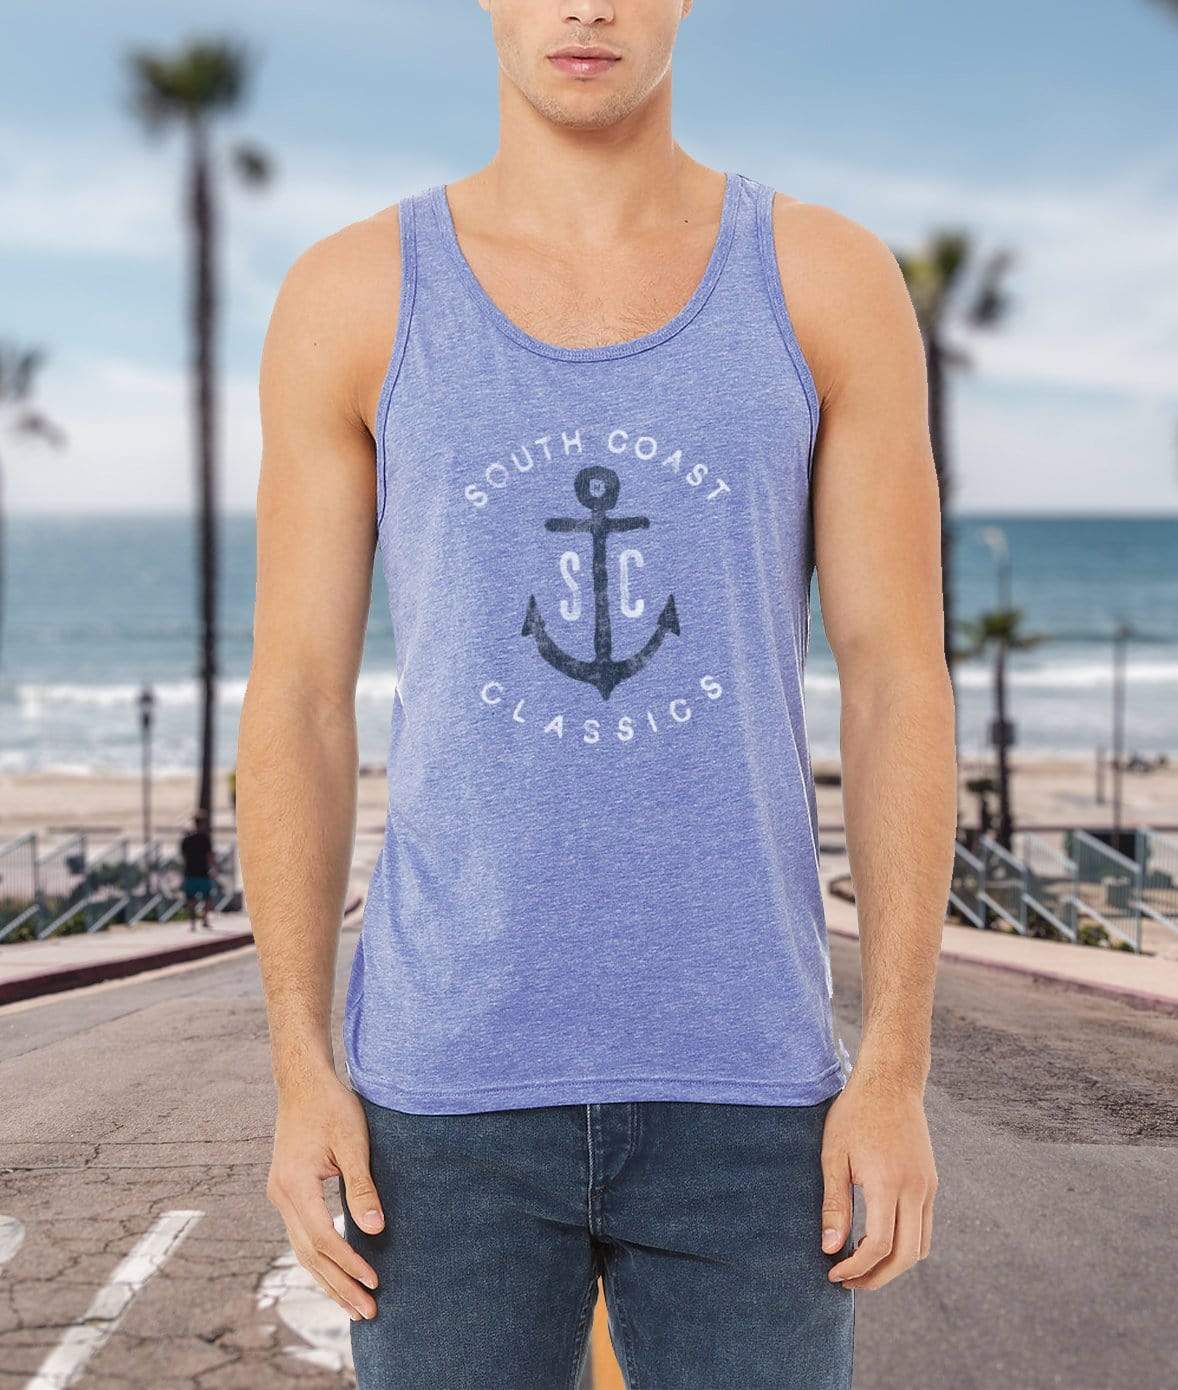 Nayked Apparel Men Men's Ridiculously Soft Graphic Lightweight Tank Top | SC Anchor